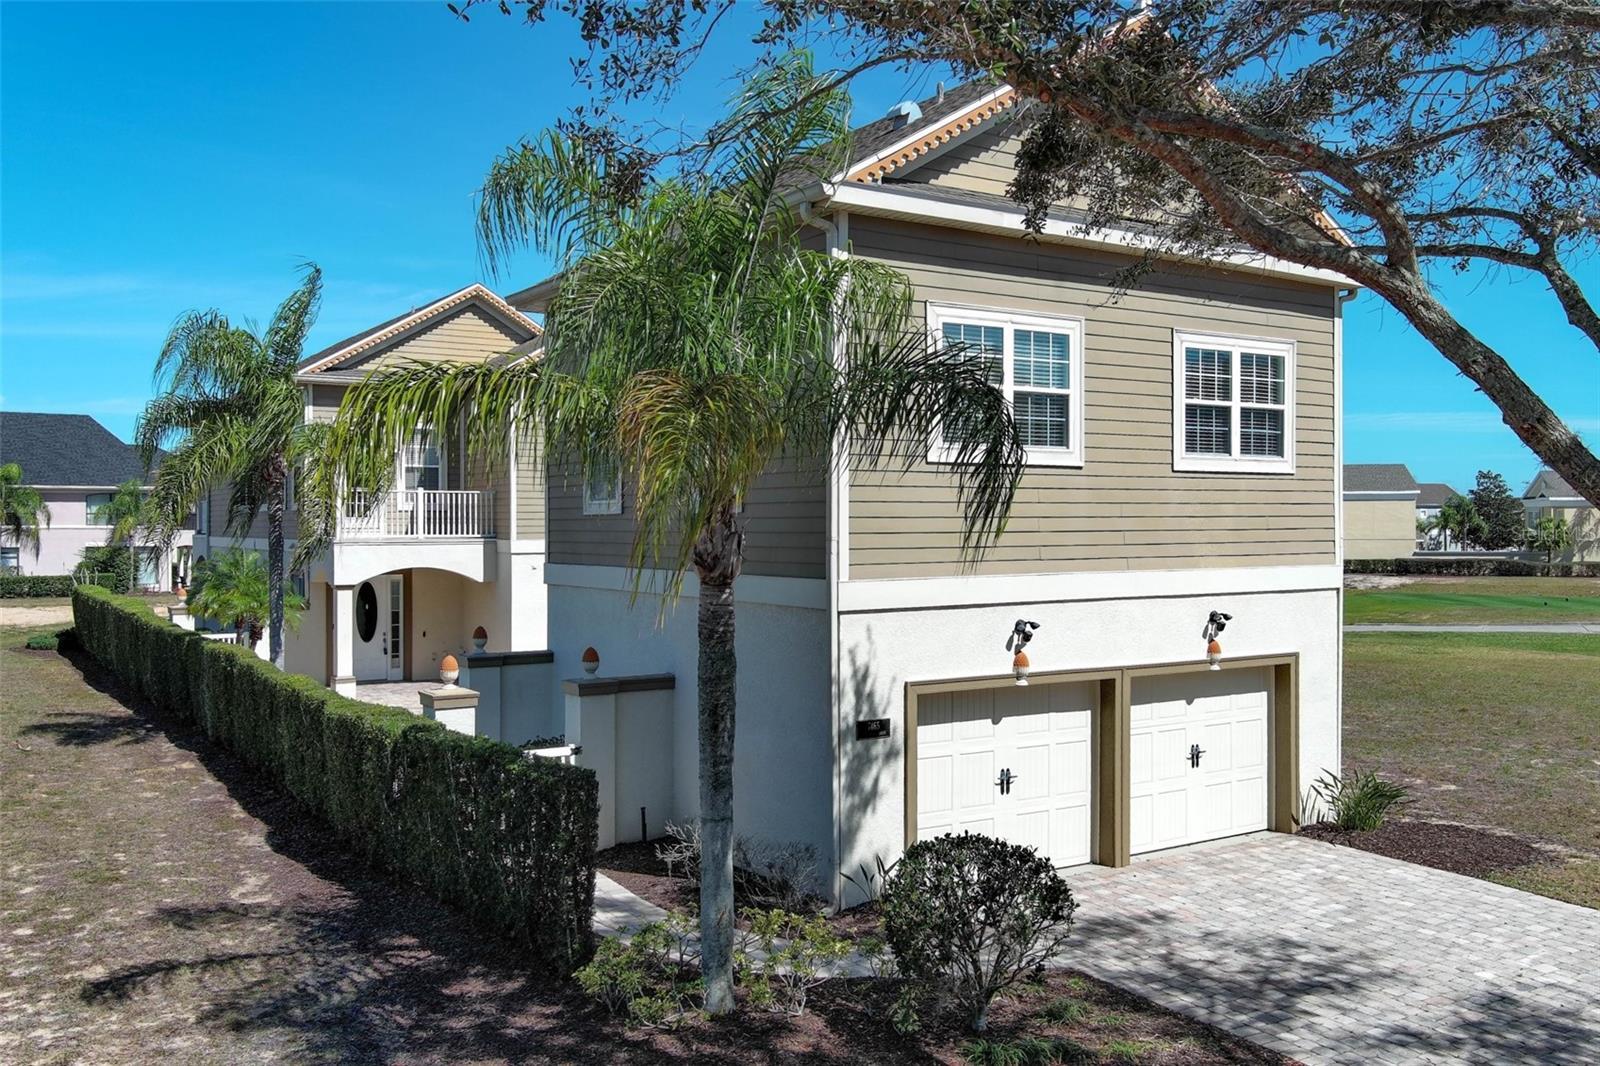 Photo one of 7465 Excitement Dr Reunion FL 34747 | MLS O6181837